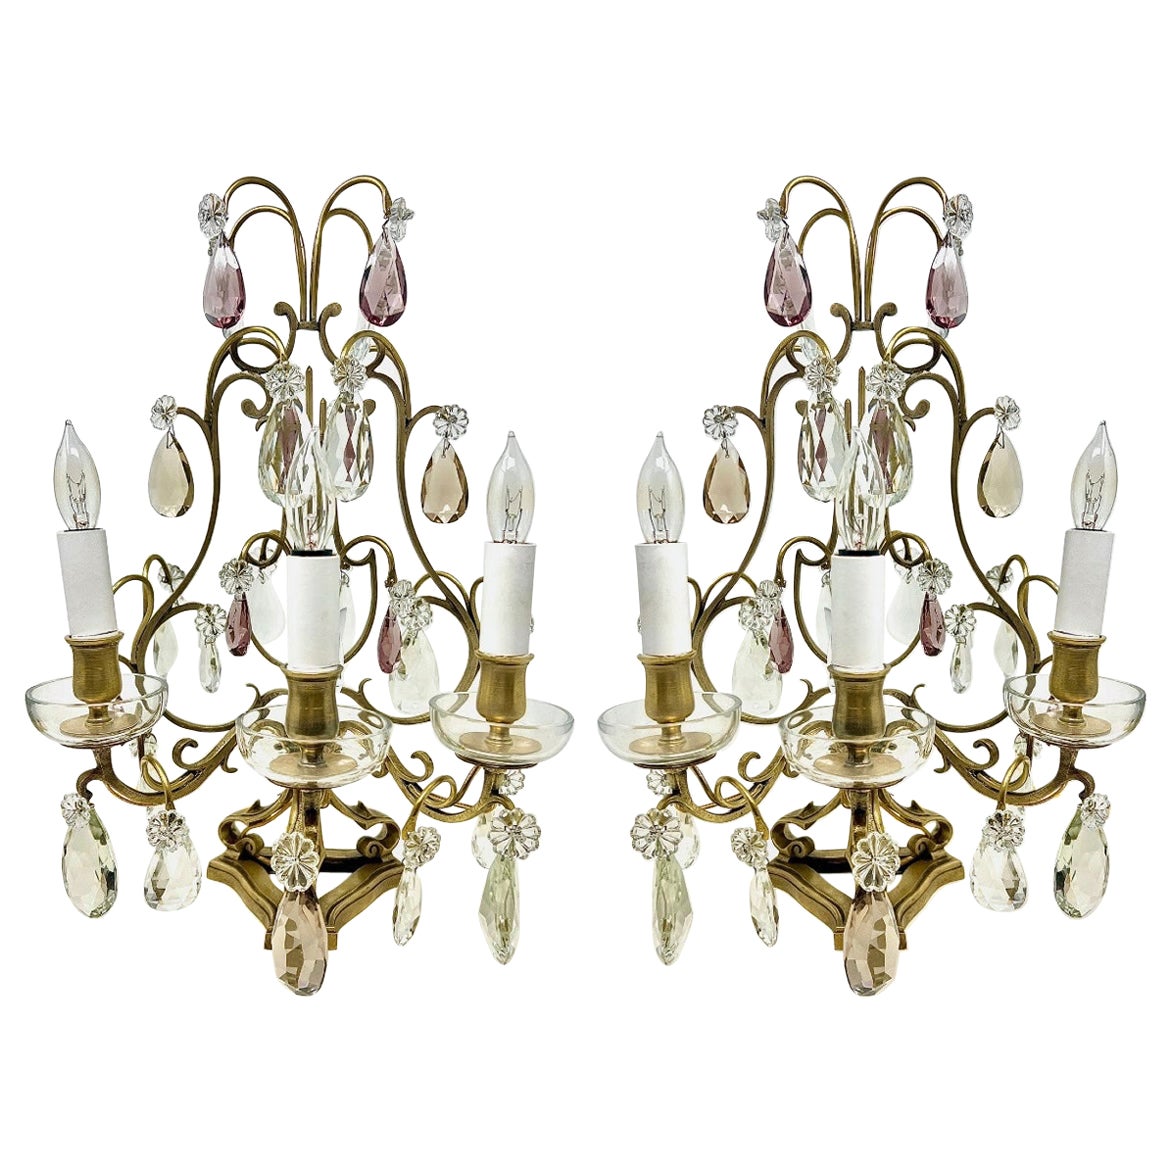 Pair Antique French Gold Bronze and Cut Crystal Girandoles, Circa 1870-1880. For Sale